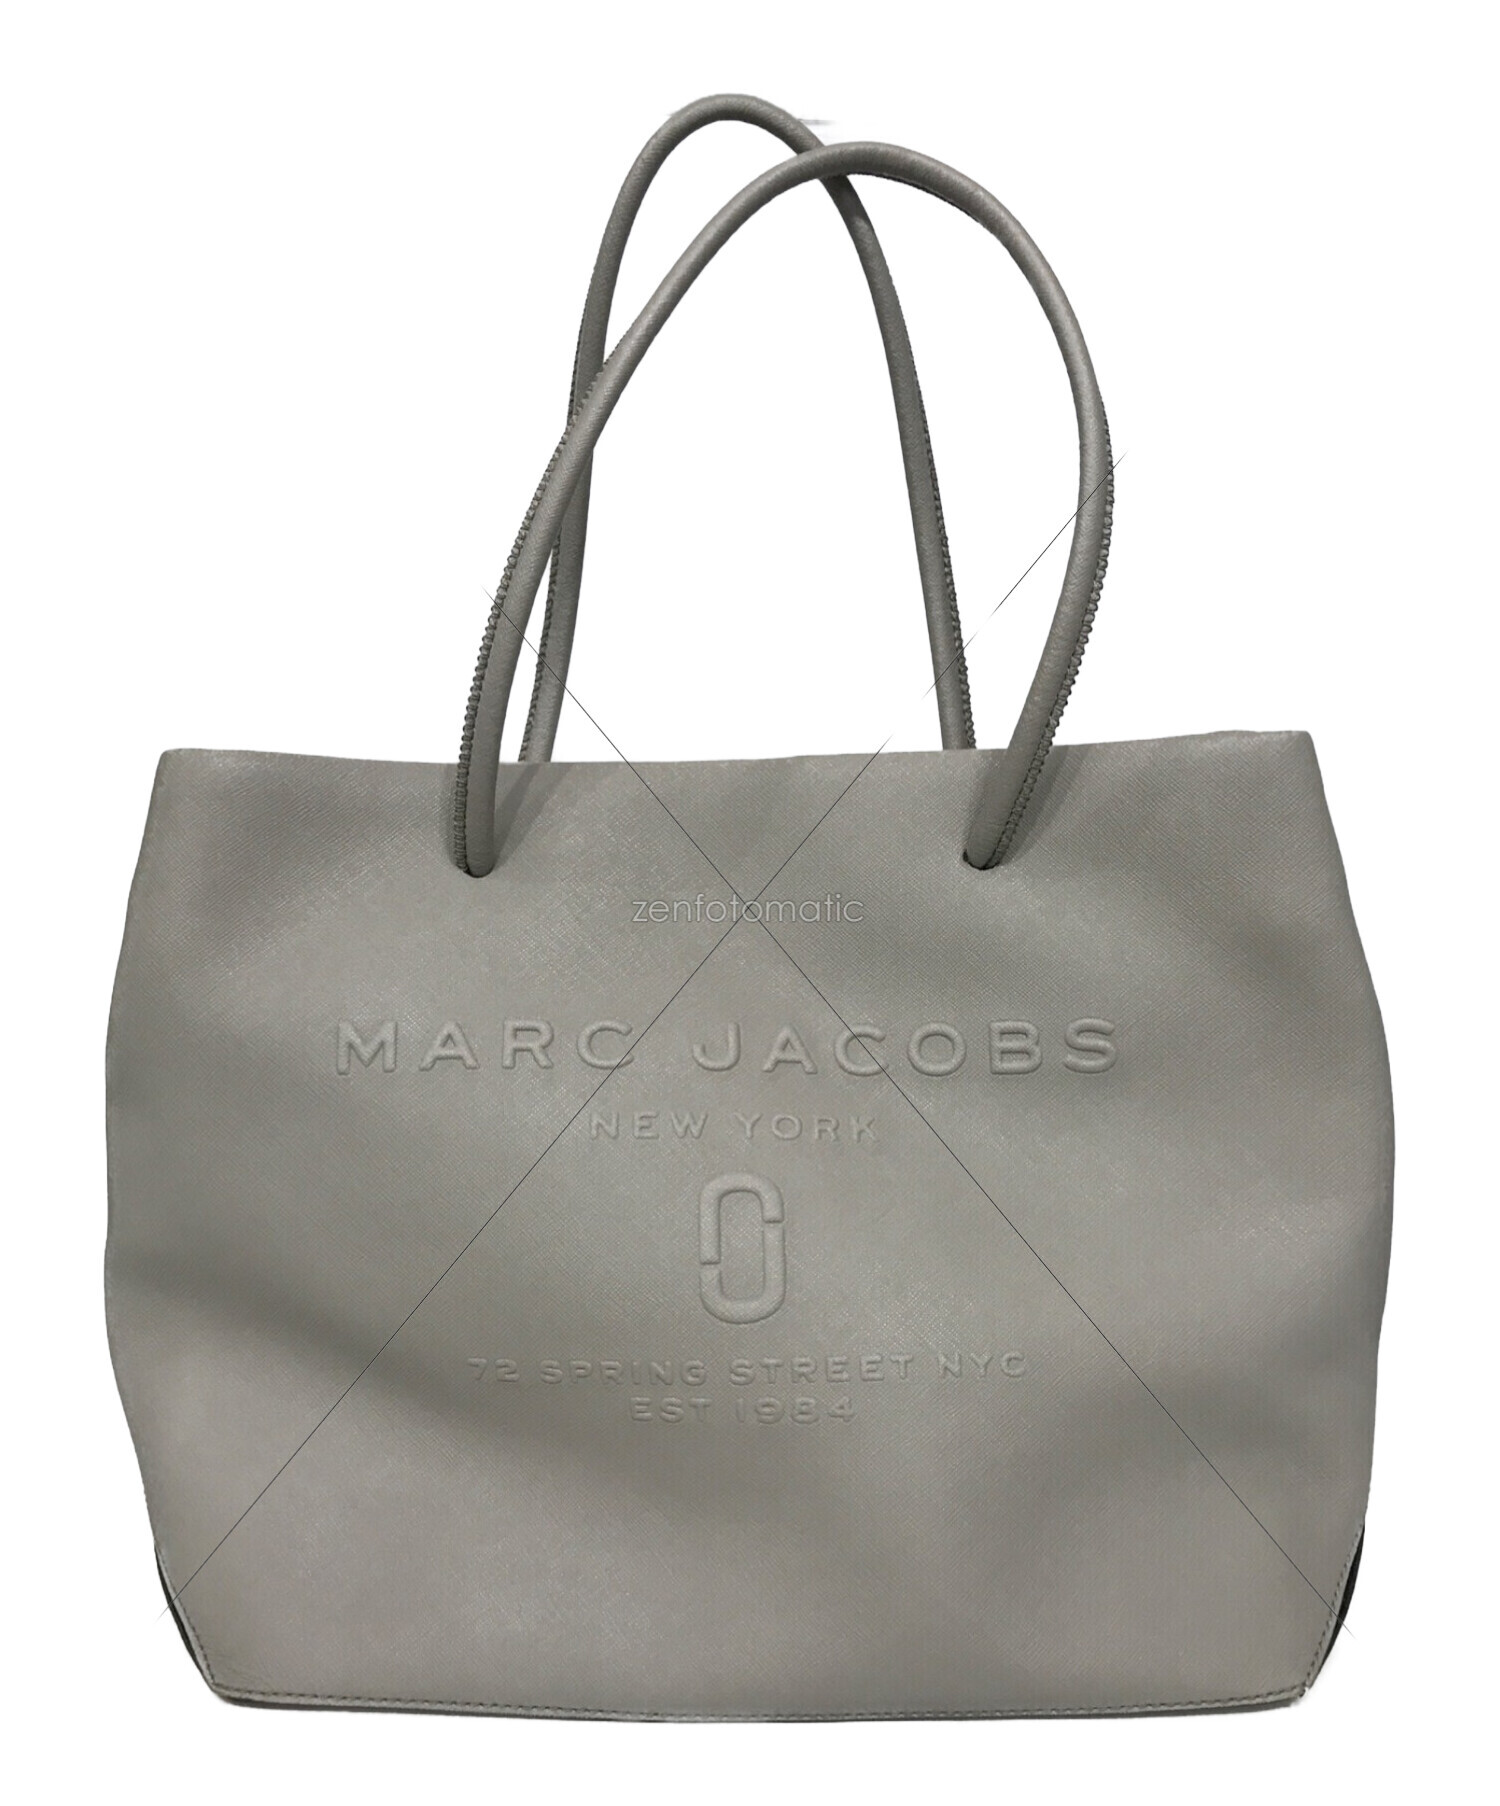 MARC BY MARC JACOBS グレー トートバッグ - トートバッグ